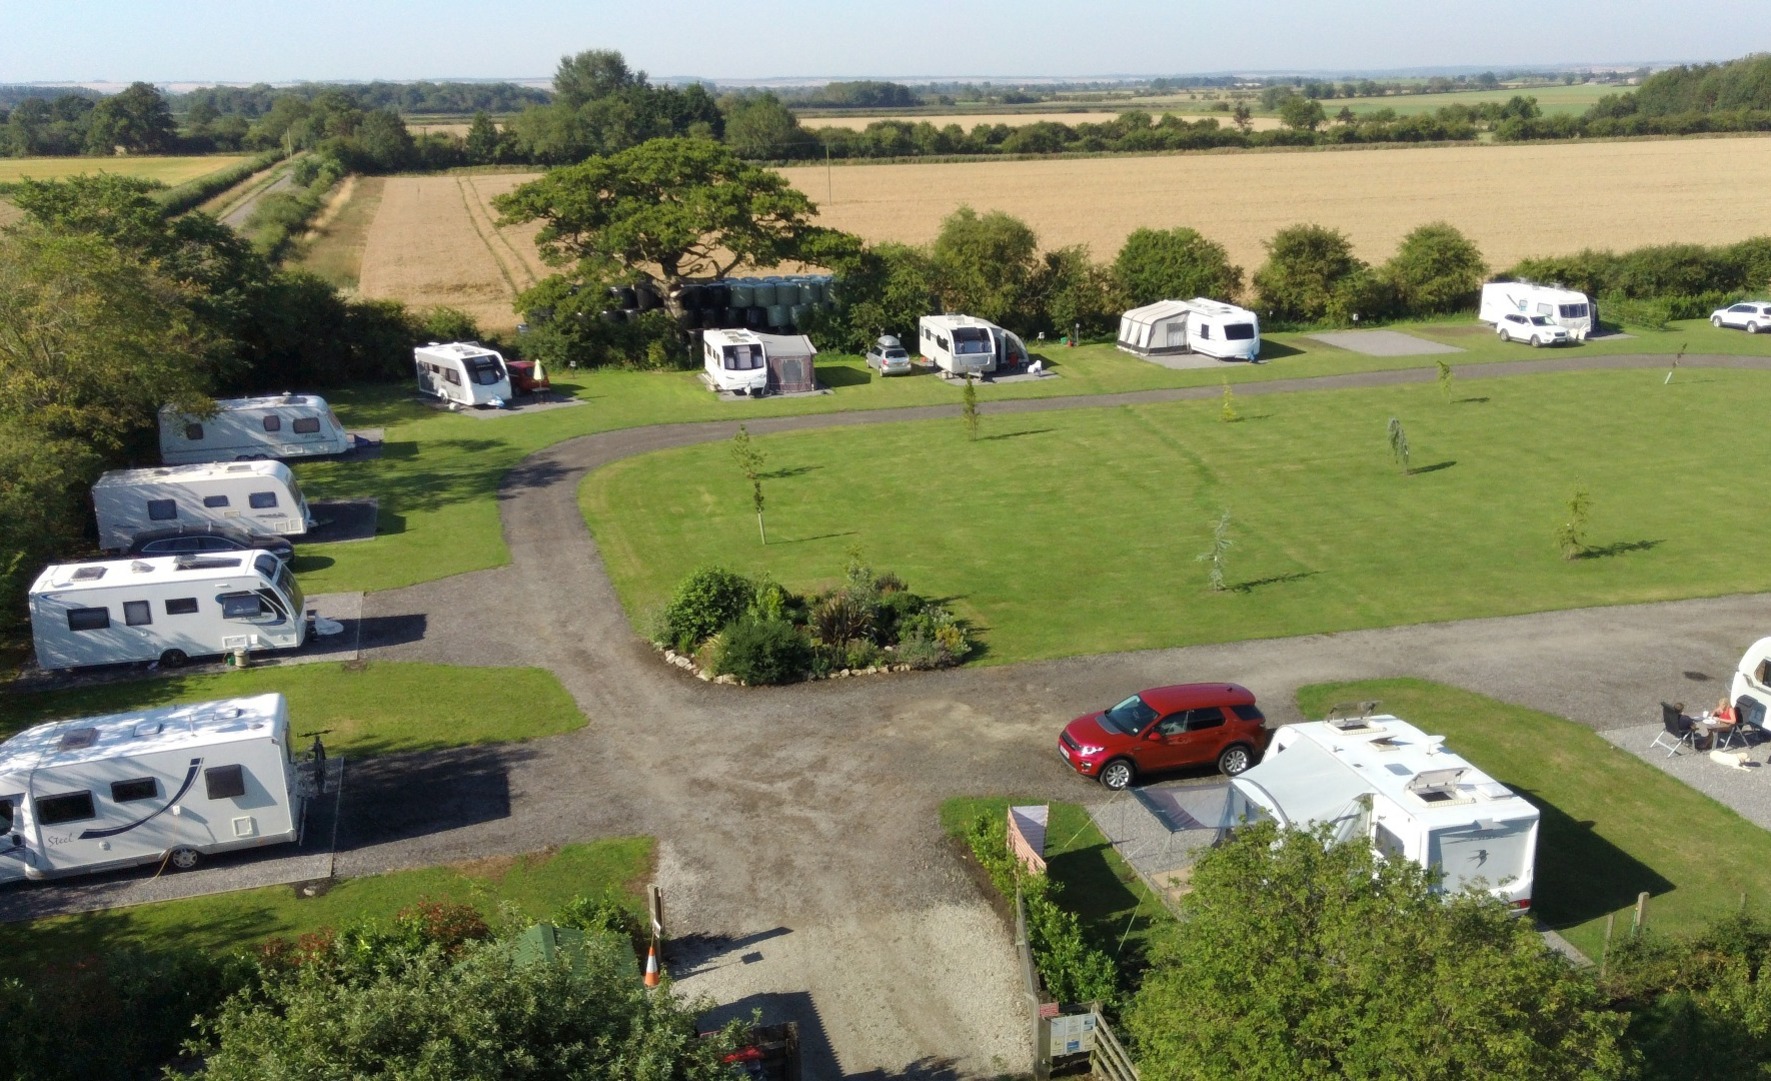 View over caravan park with caravans on the pitches